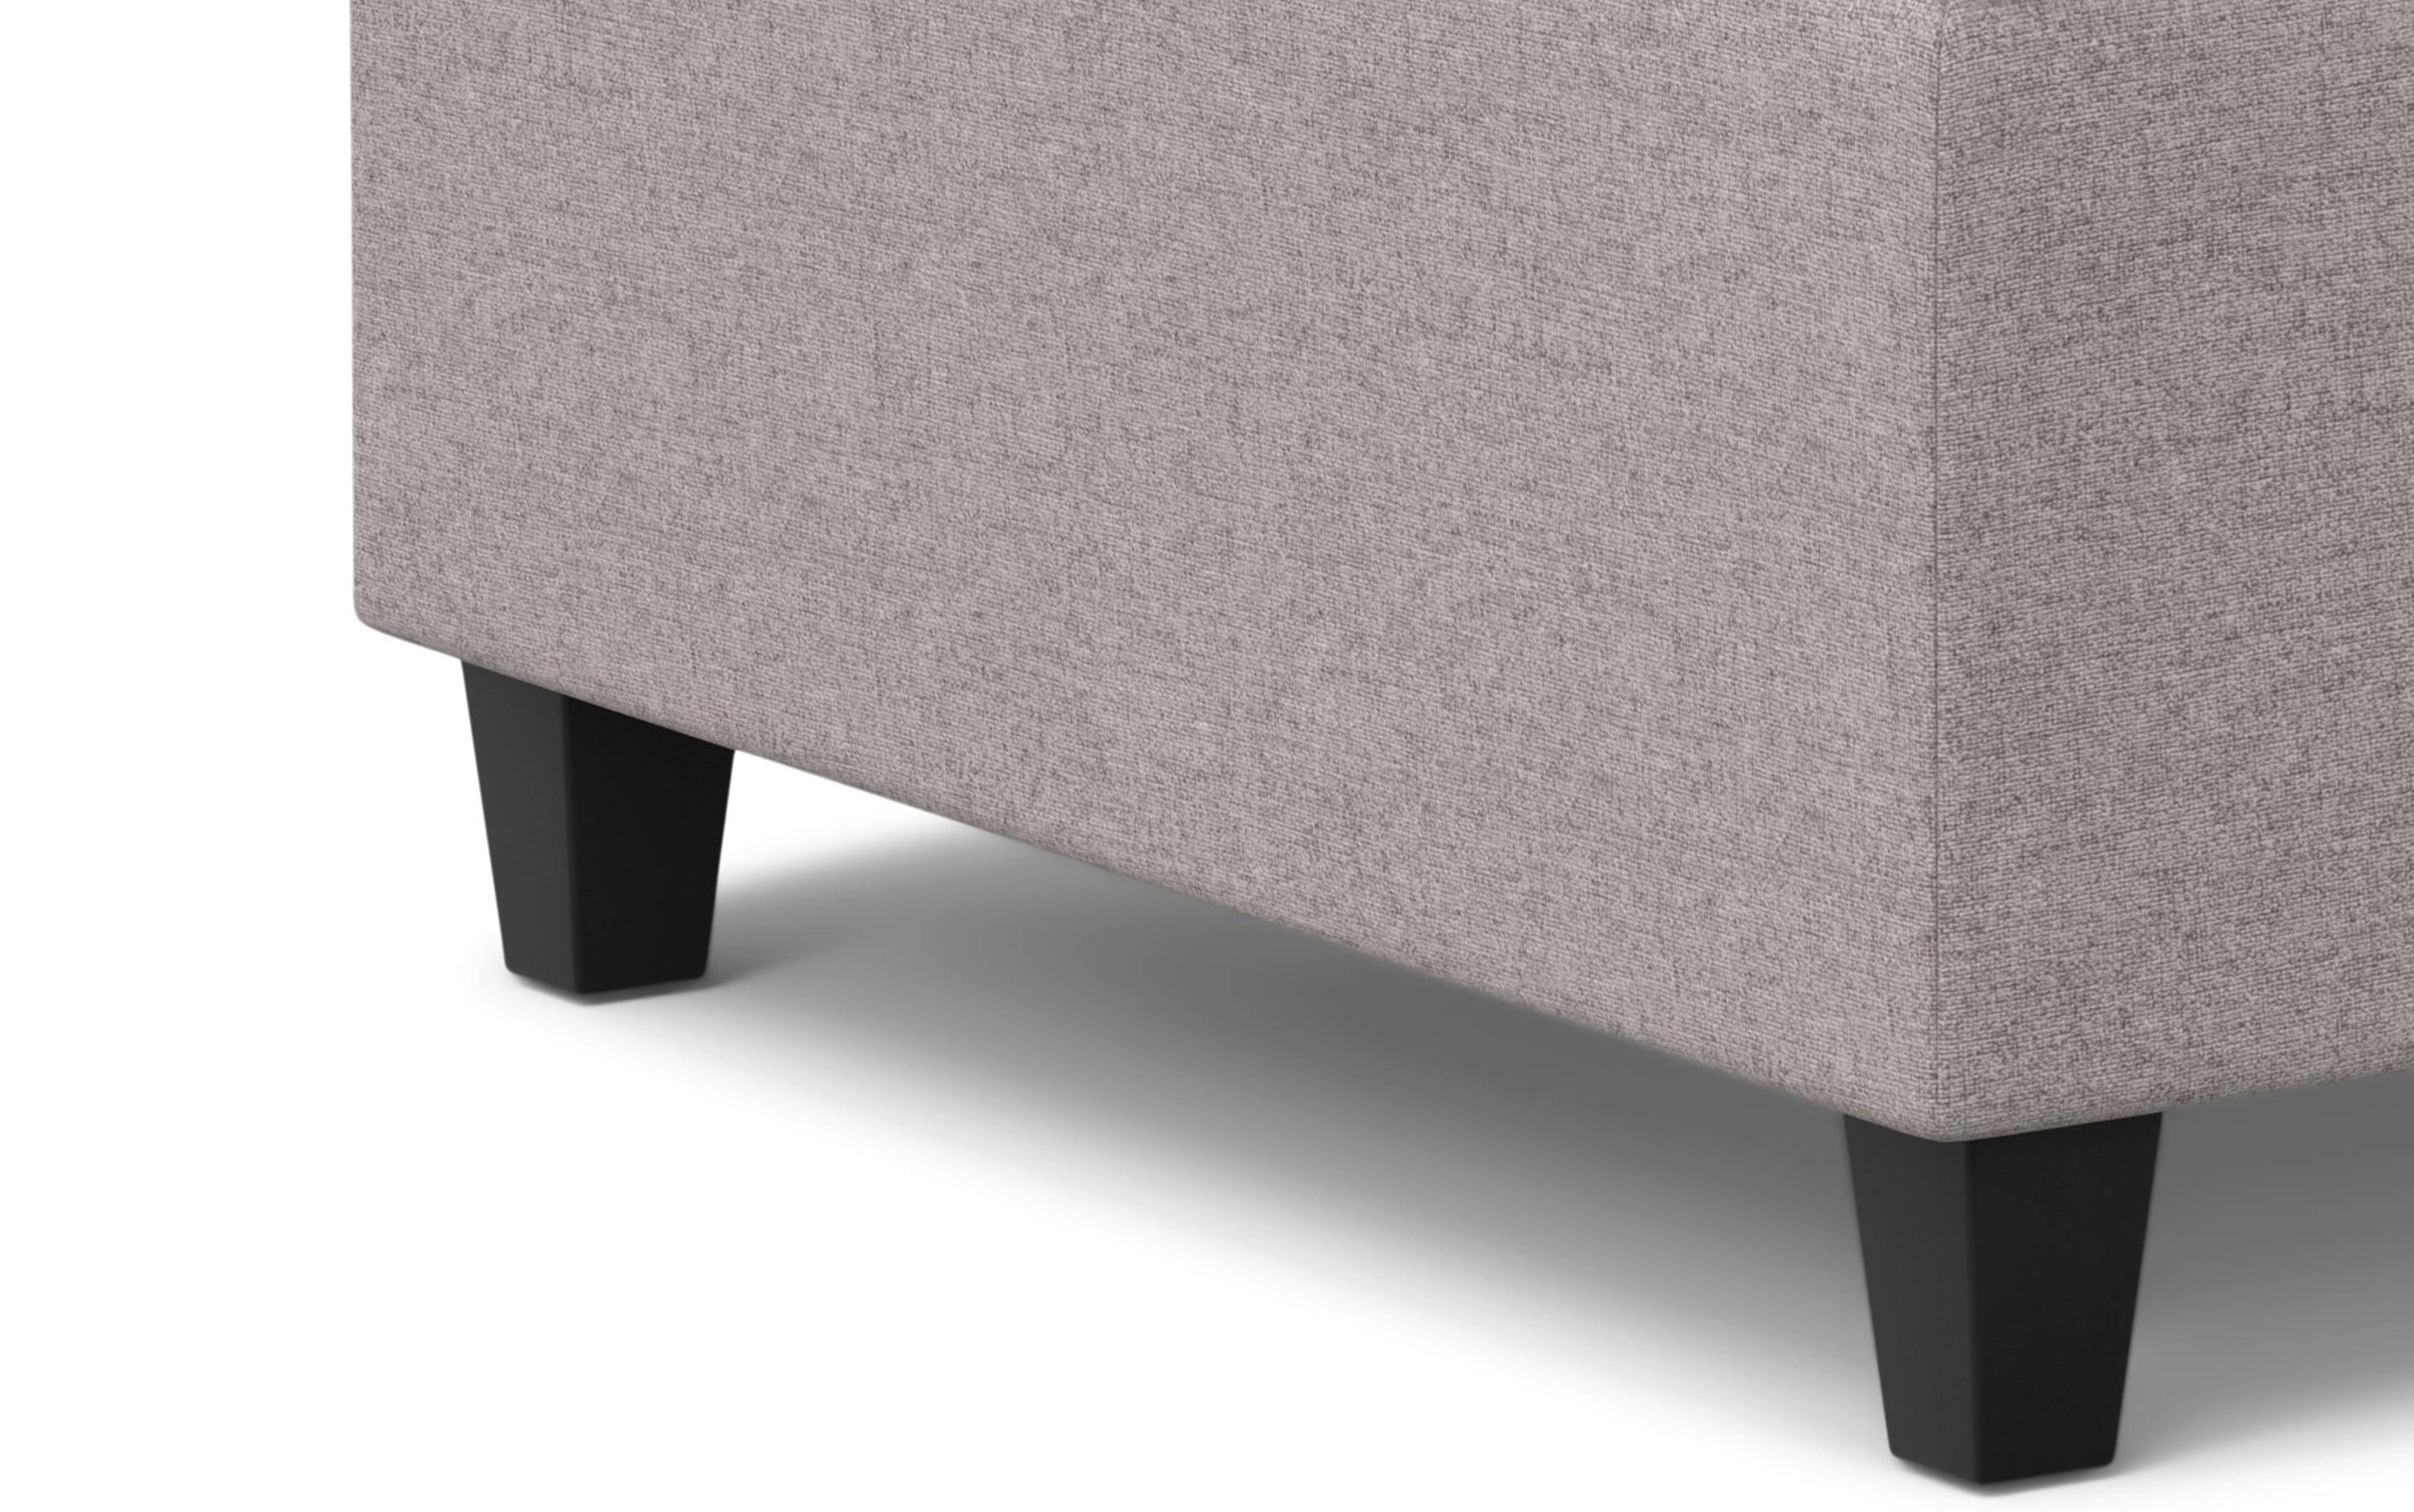 Cloud Grey Linen Style Fabric | Harrison Small Square Coffee Table Storage Ottoman